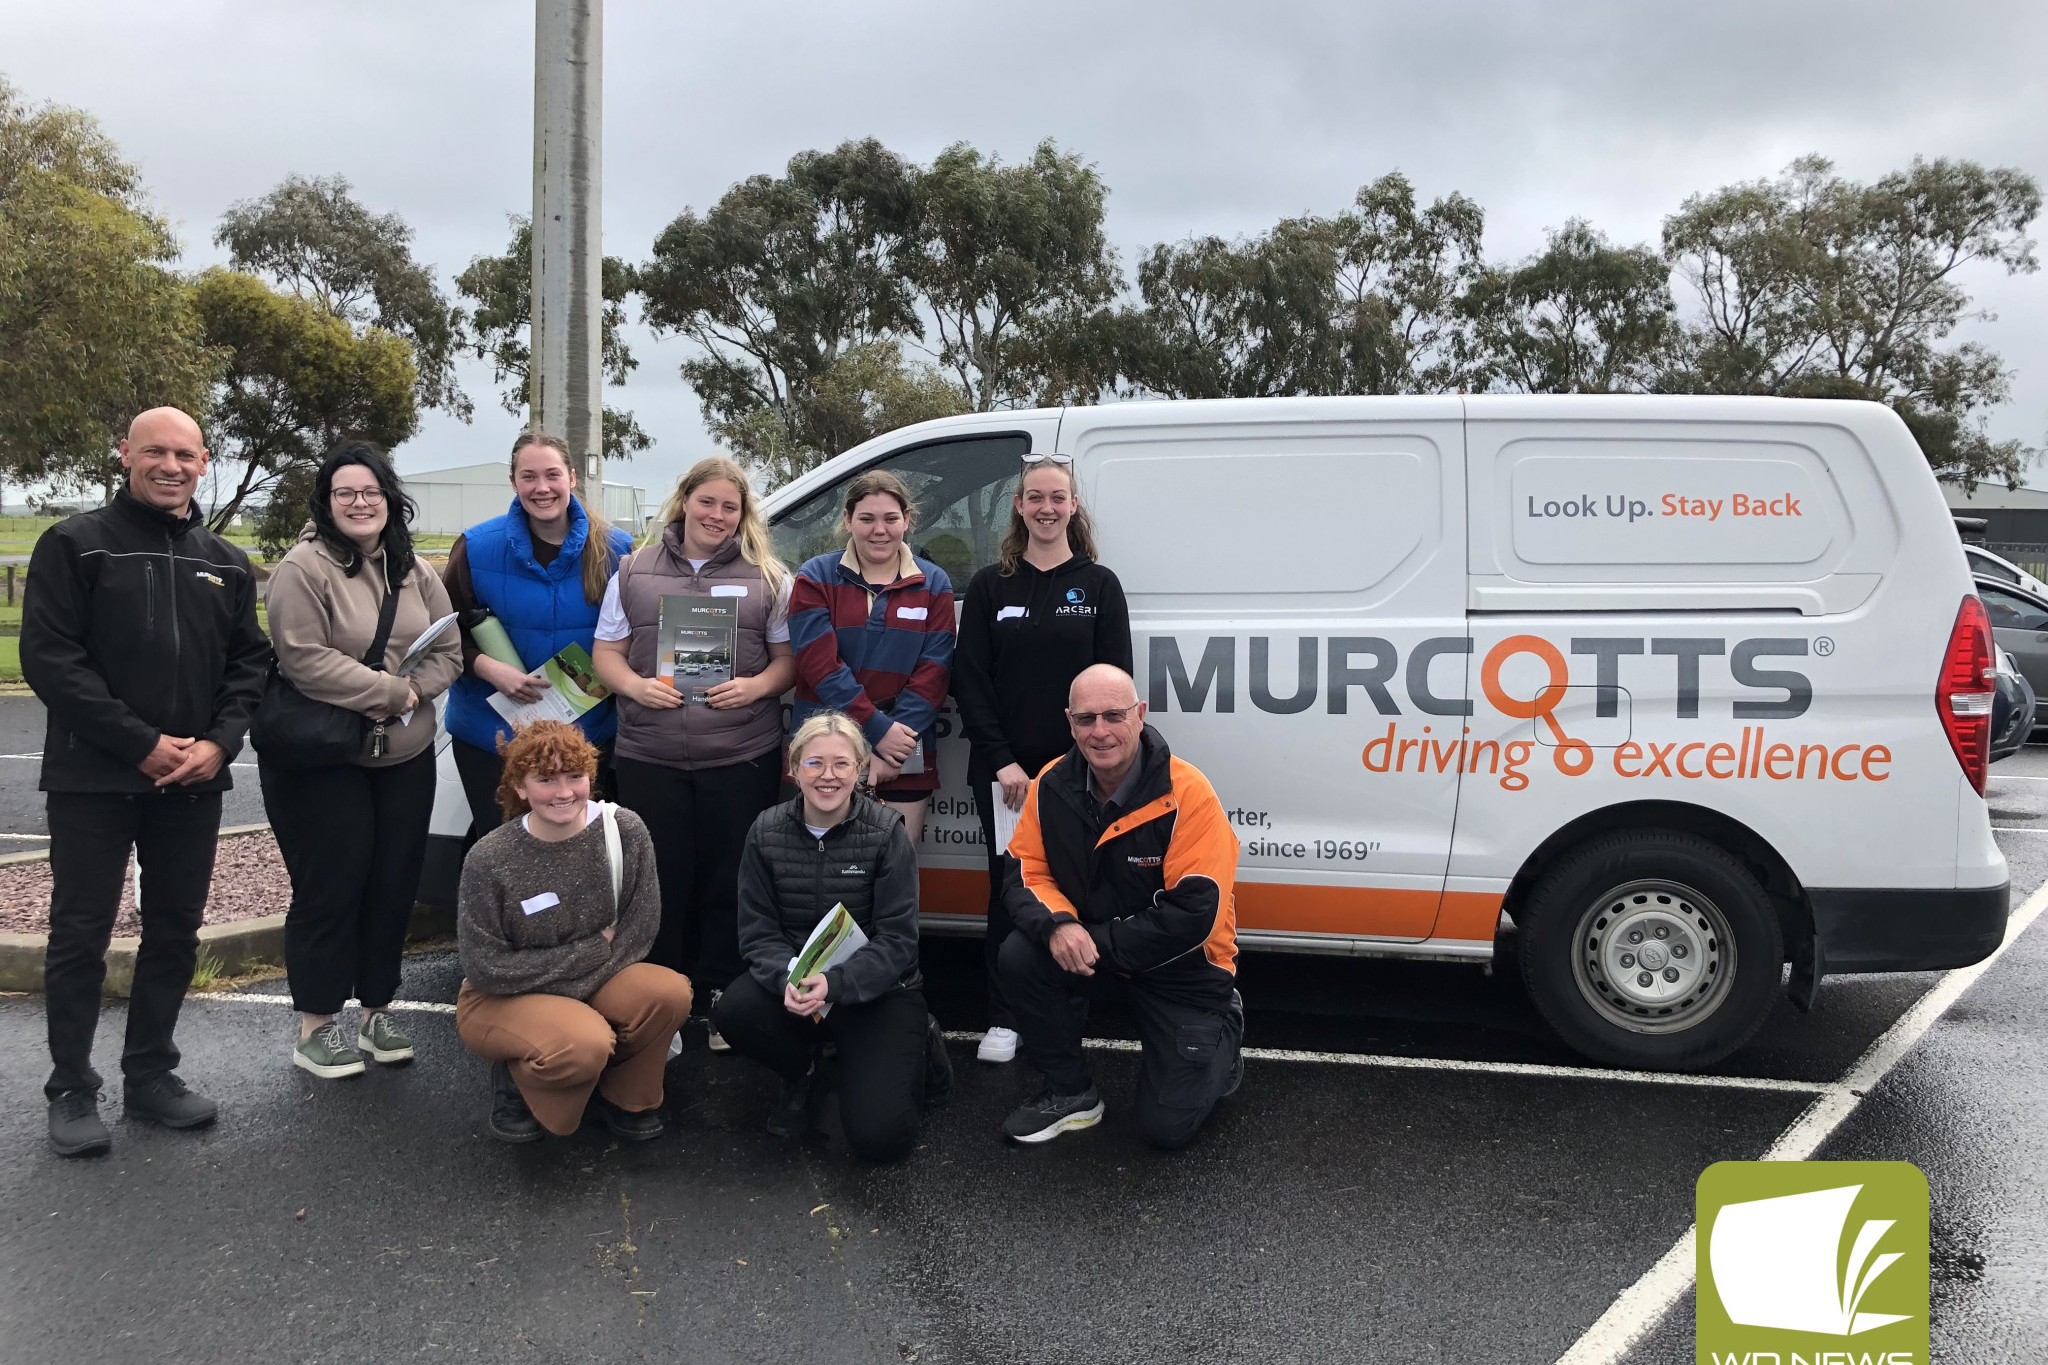 Upskill: More than 1000 young south west Victorians took advantage of the opportunity to boost their skills through free training, according to the final FUSE South West program report released this week.